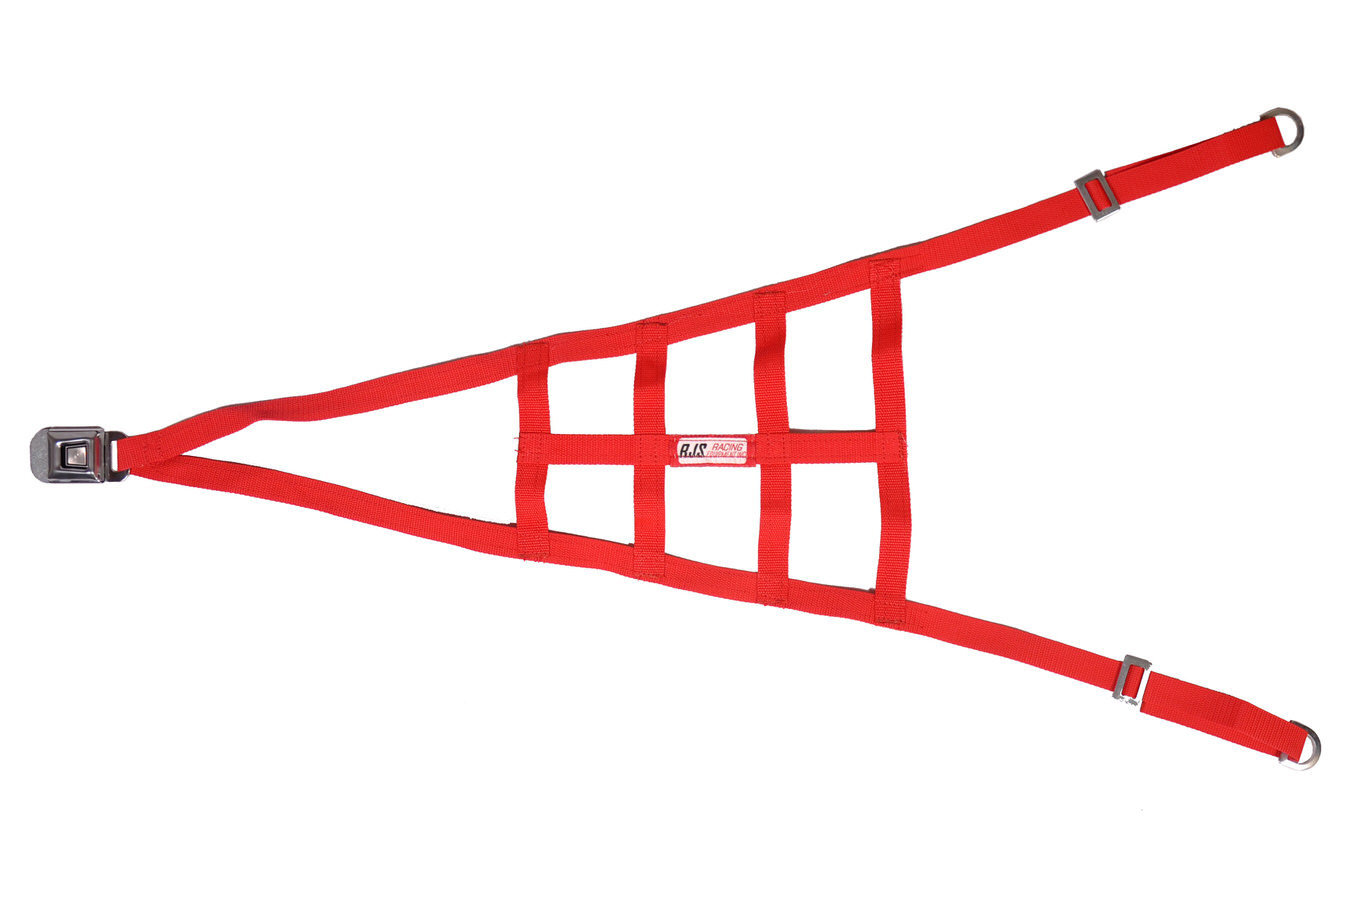 RJS Safety 10001504 - Roll Cage Net, Nylon Webbing, Triangle, Red, Sprint Car, Kit